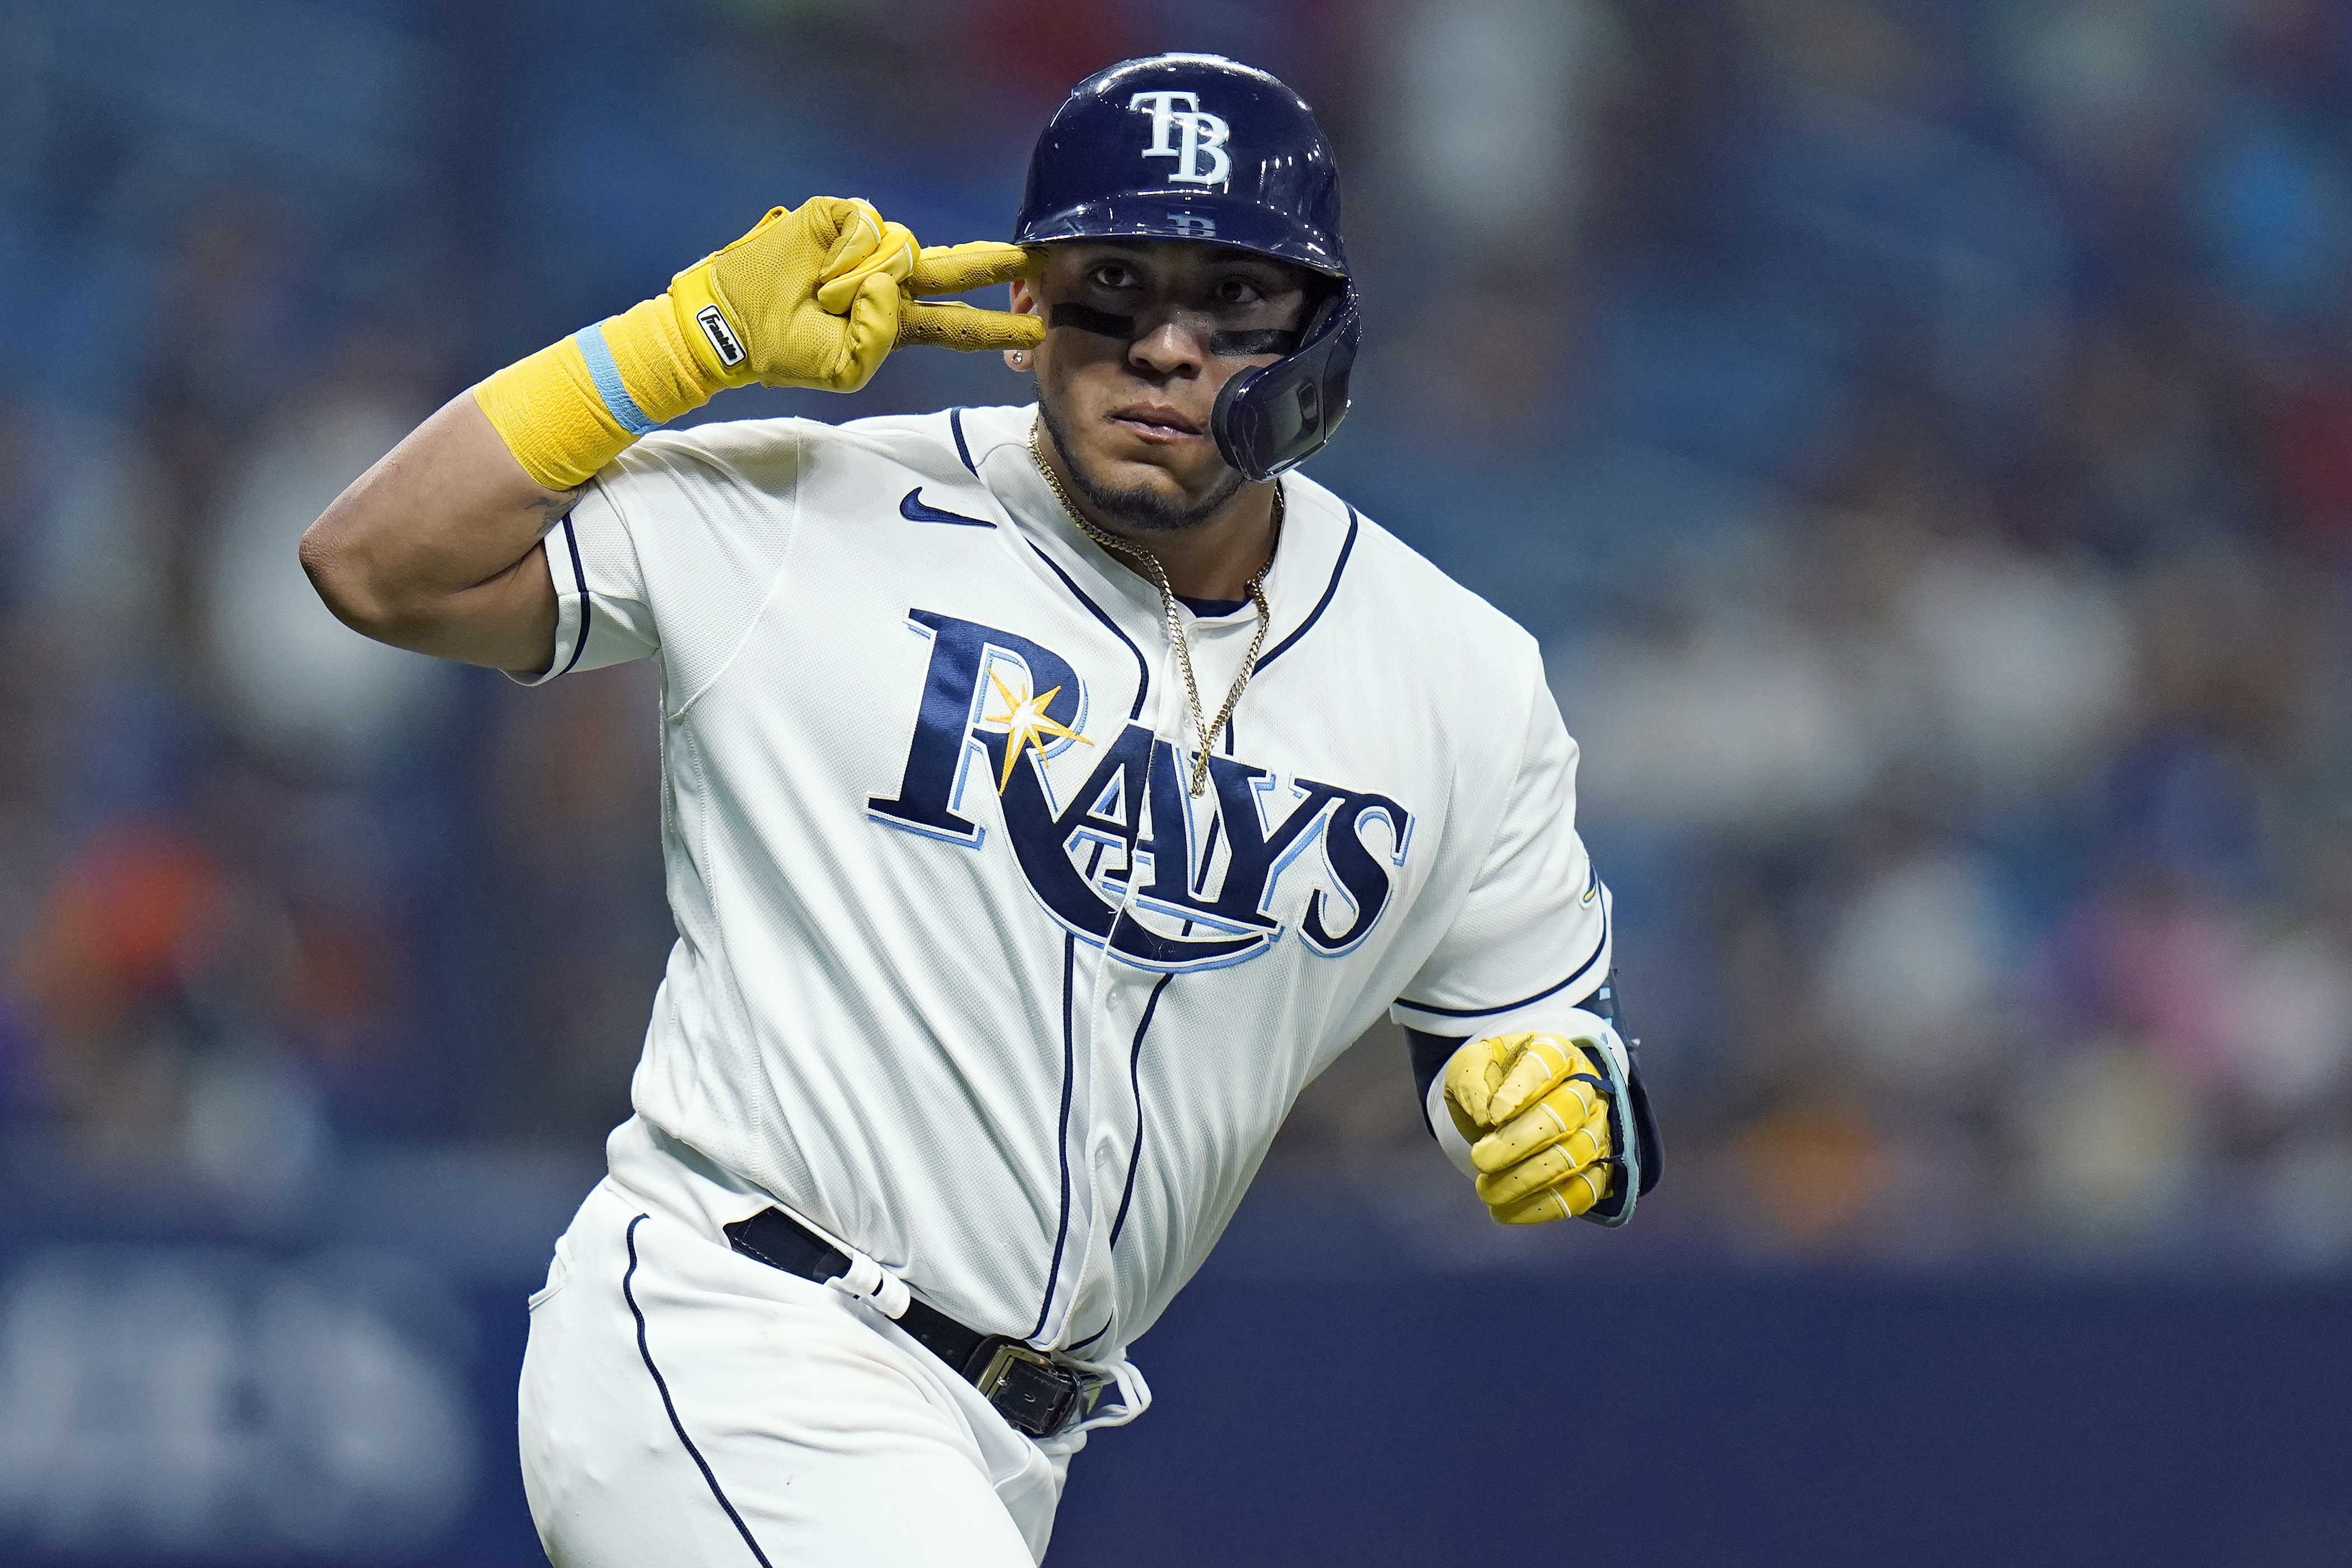 Game 89: Red Sox at Rays - Over the Monster